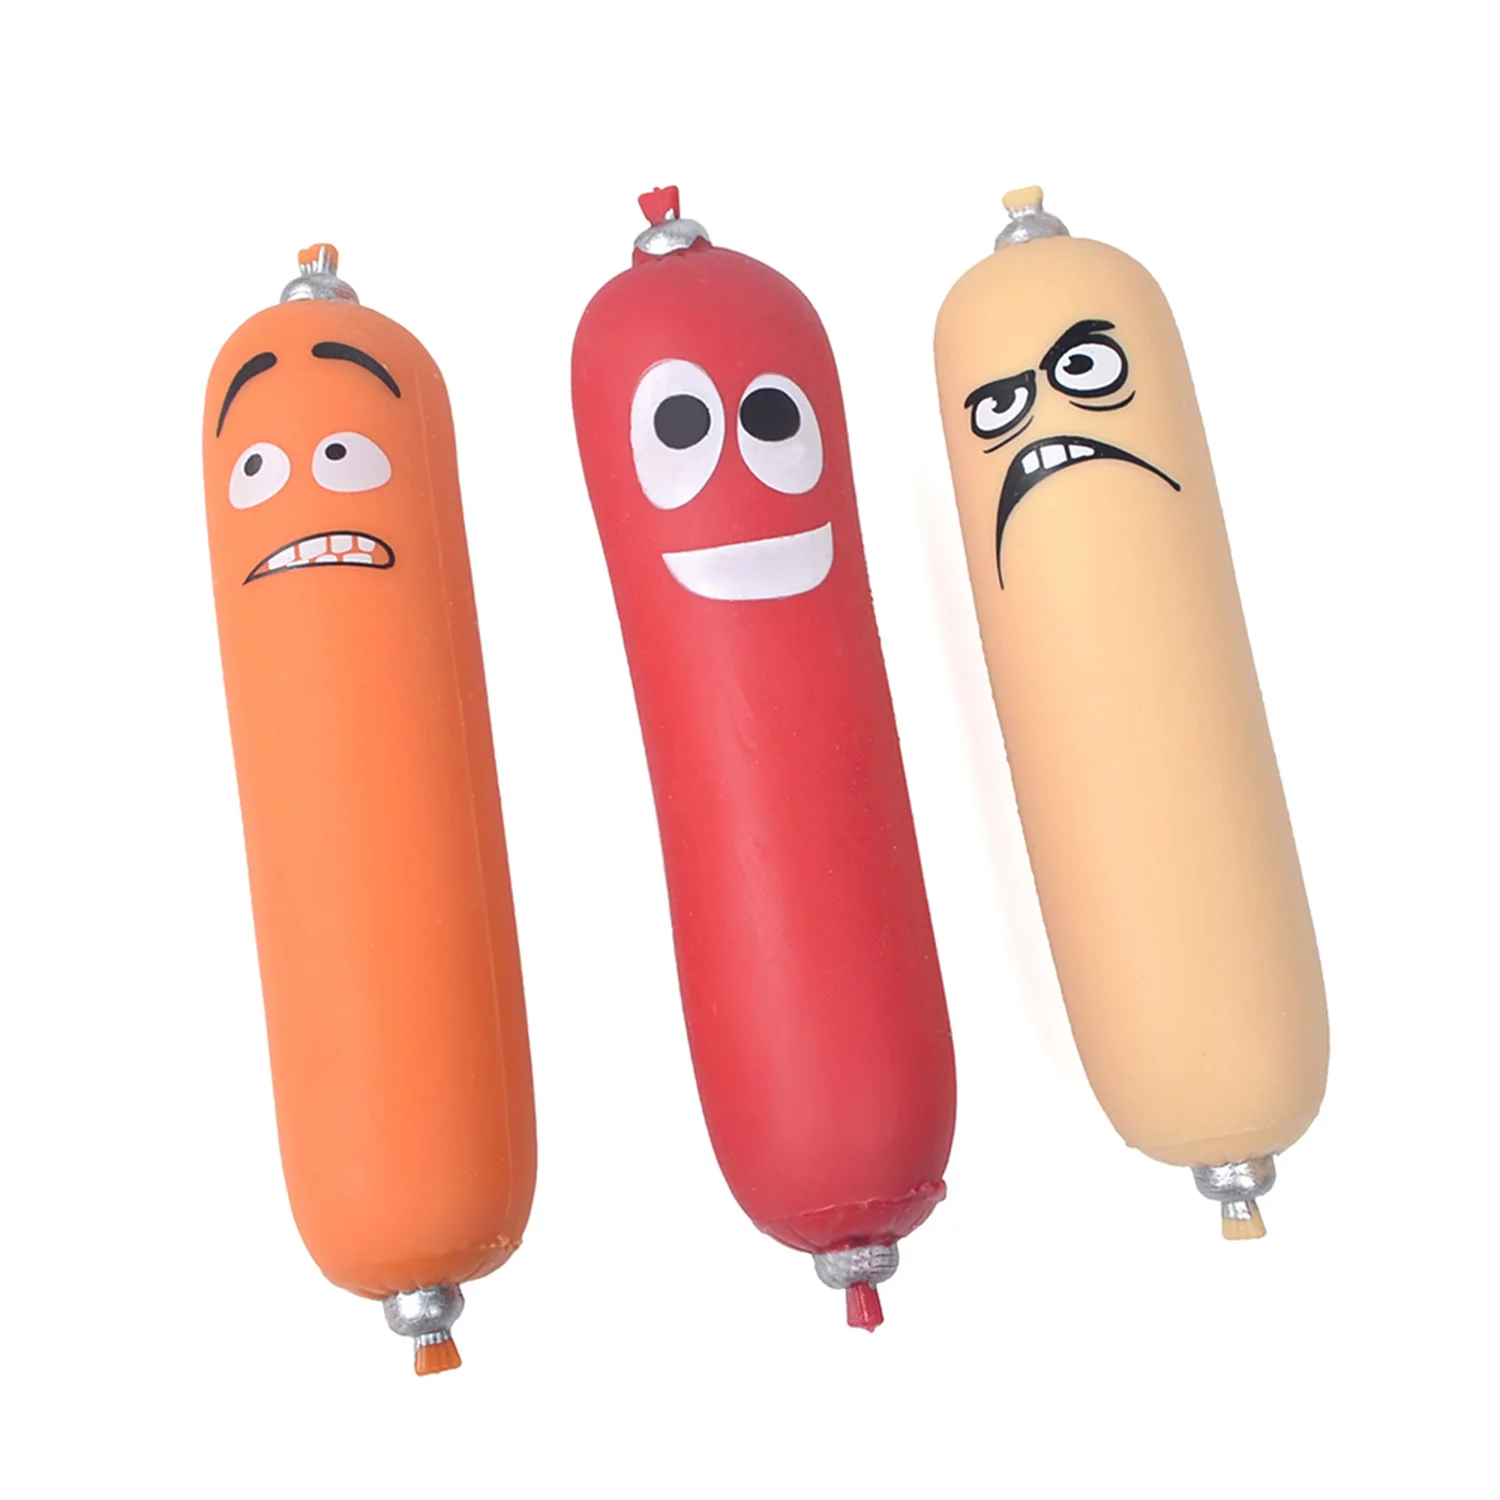 

Strange New Toy Vent Memory Sand Hot Dog Lala Le Simulation Sausage Decompression Stretch Toy Squishy Stress Reliever Toy Kawaii